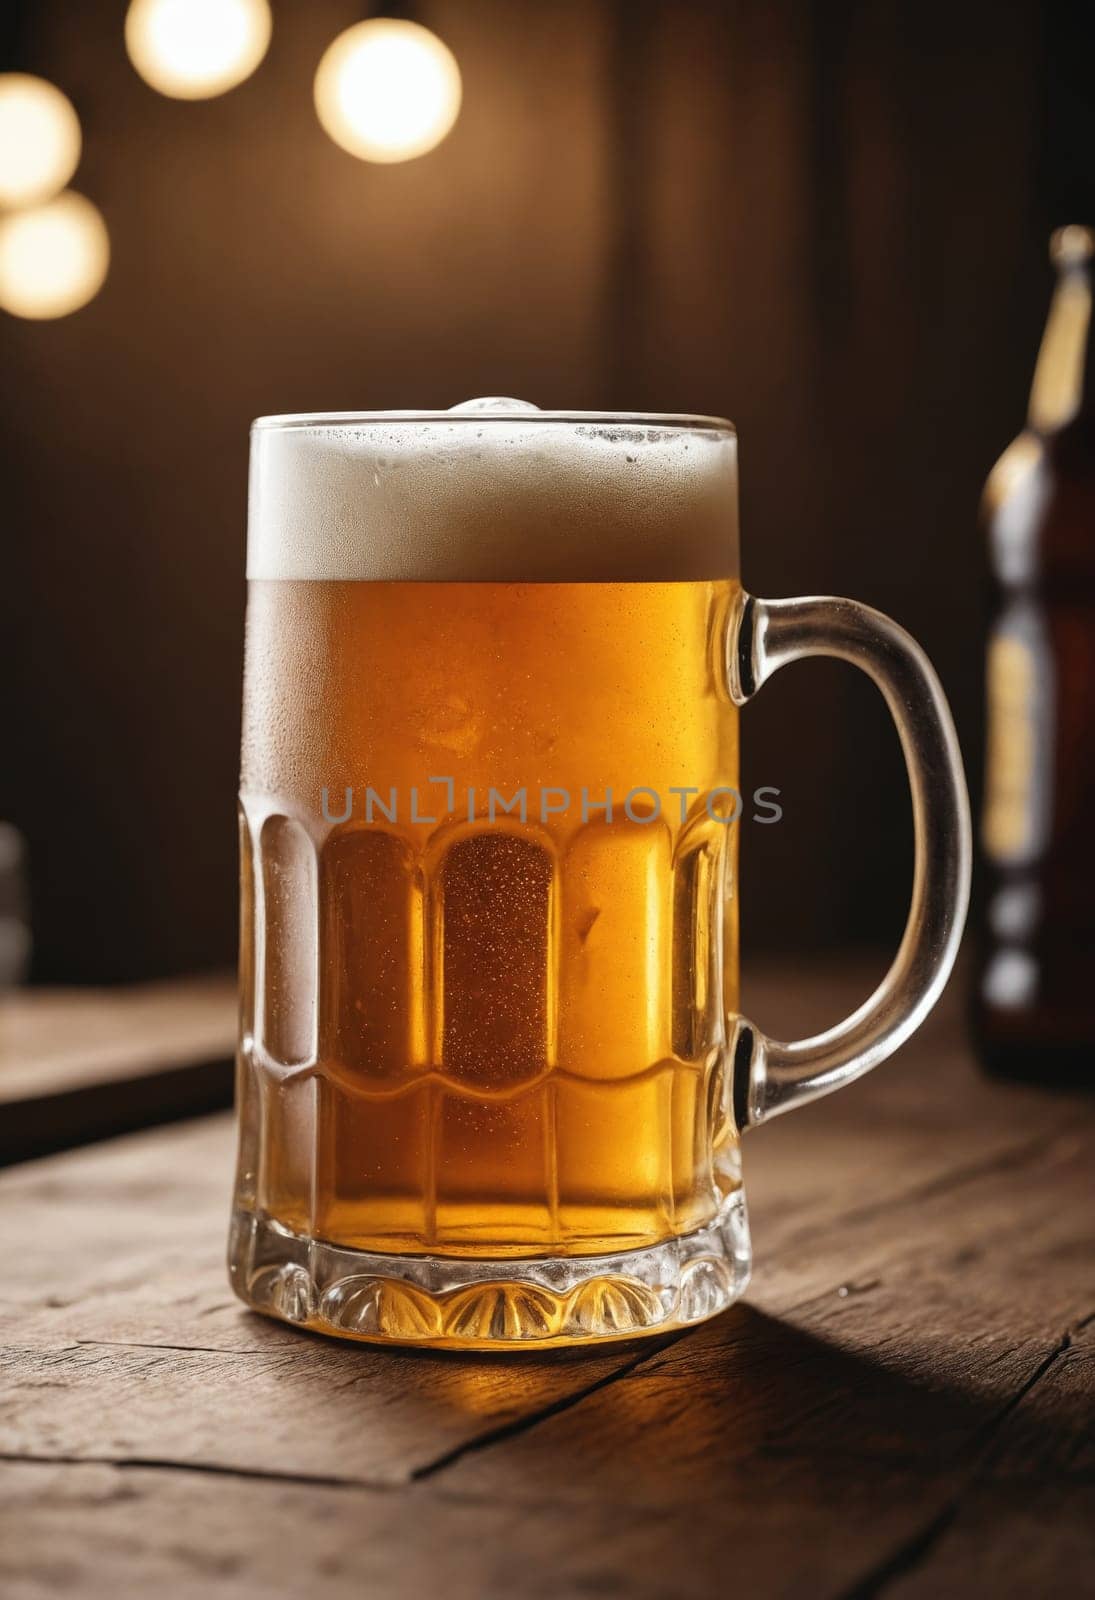 A beer glass filled with liquid is placed on a wooden table, part of the drinkware and serveware in a bar setting